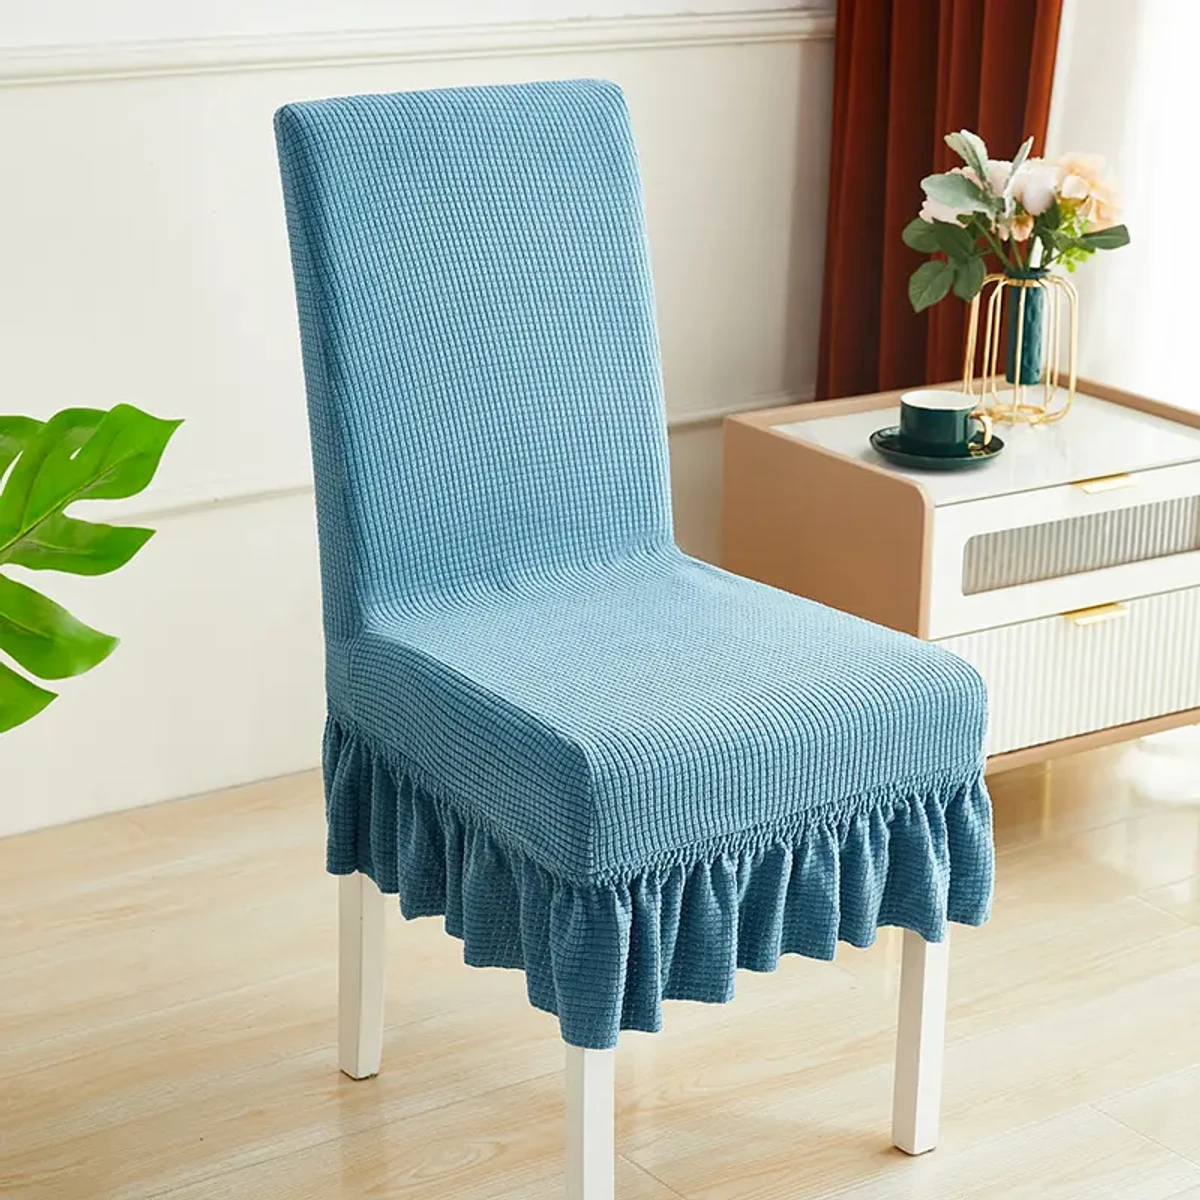 Solid Color Chair Covers Decoration Chair Cover for Dining Room Seat (sky blue)